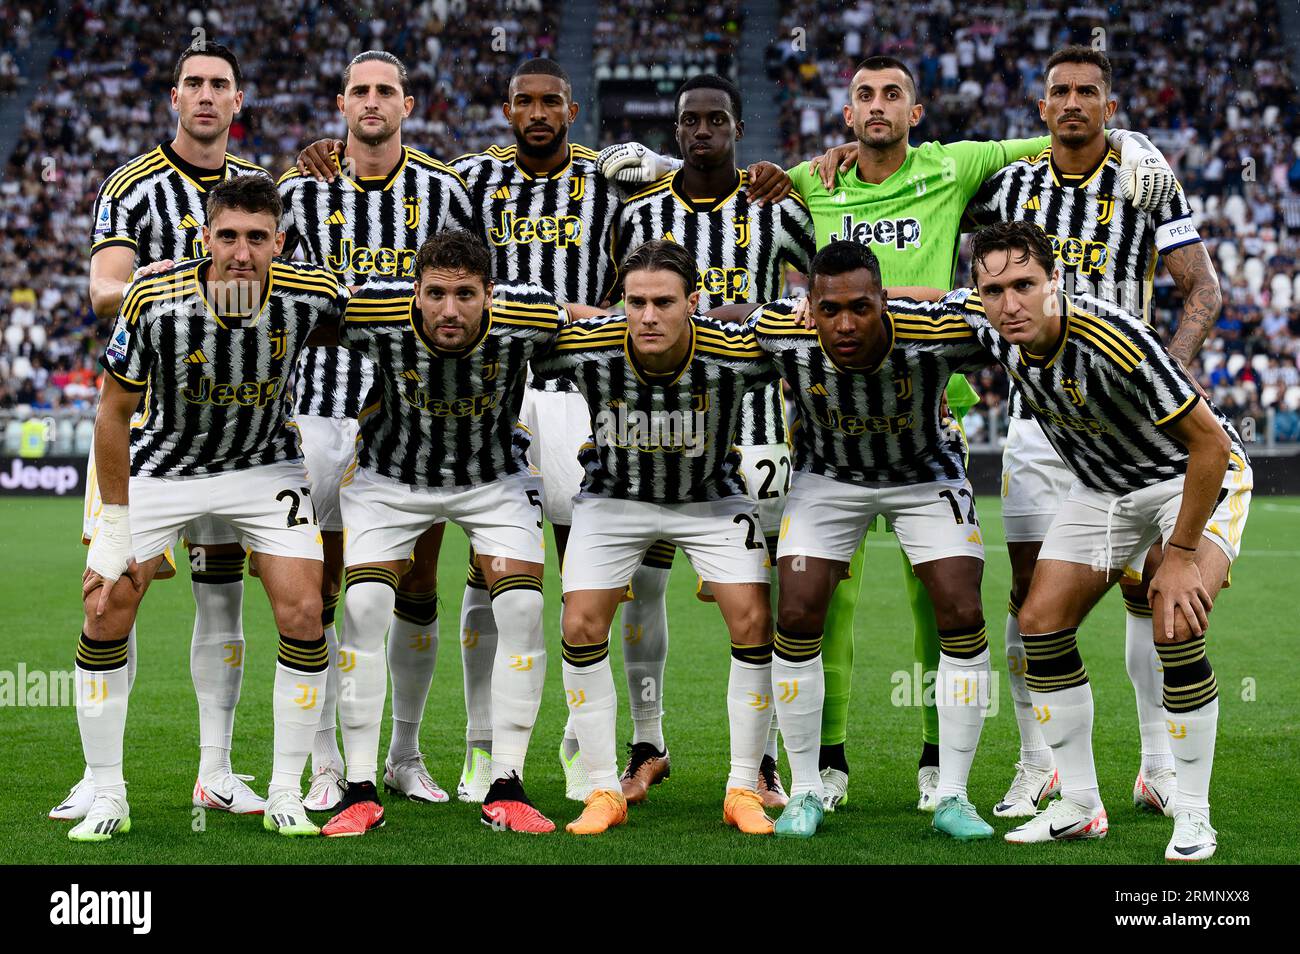 Players of Juventus FC pose for a team photo prior to the Serie A football match between Juventus FC and Bologna FC. Stock Photo